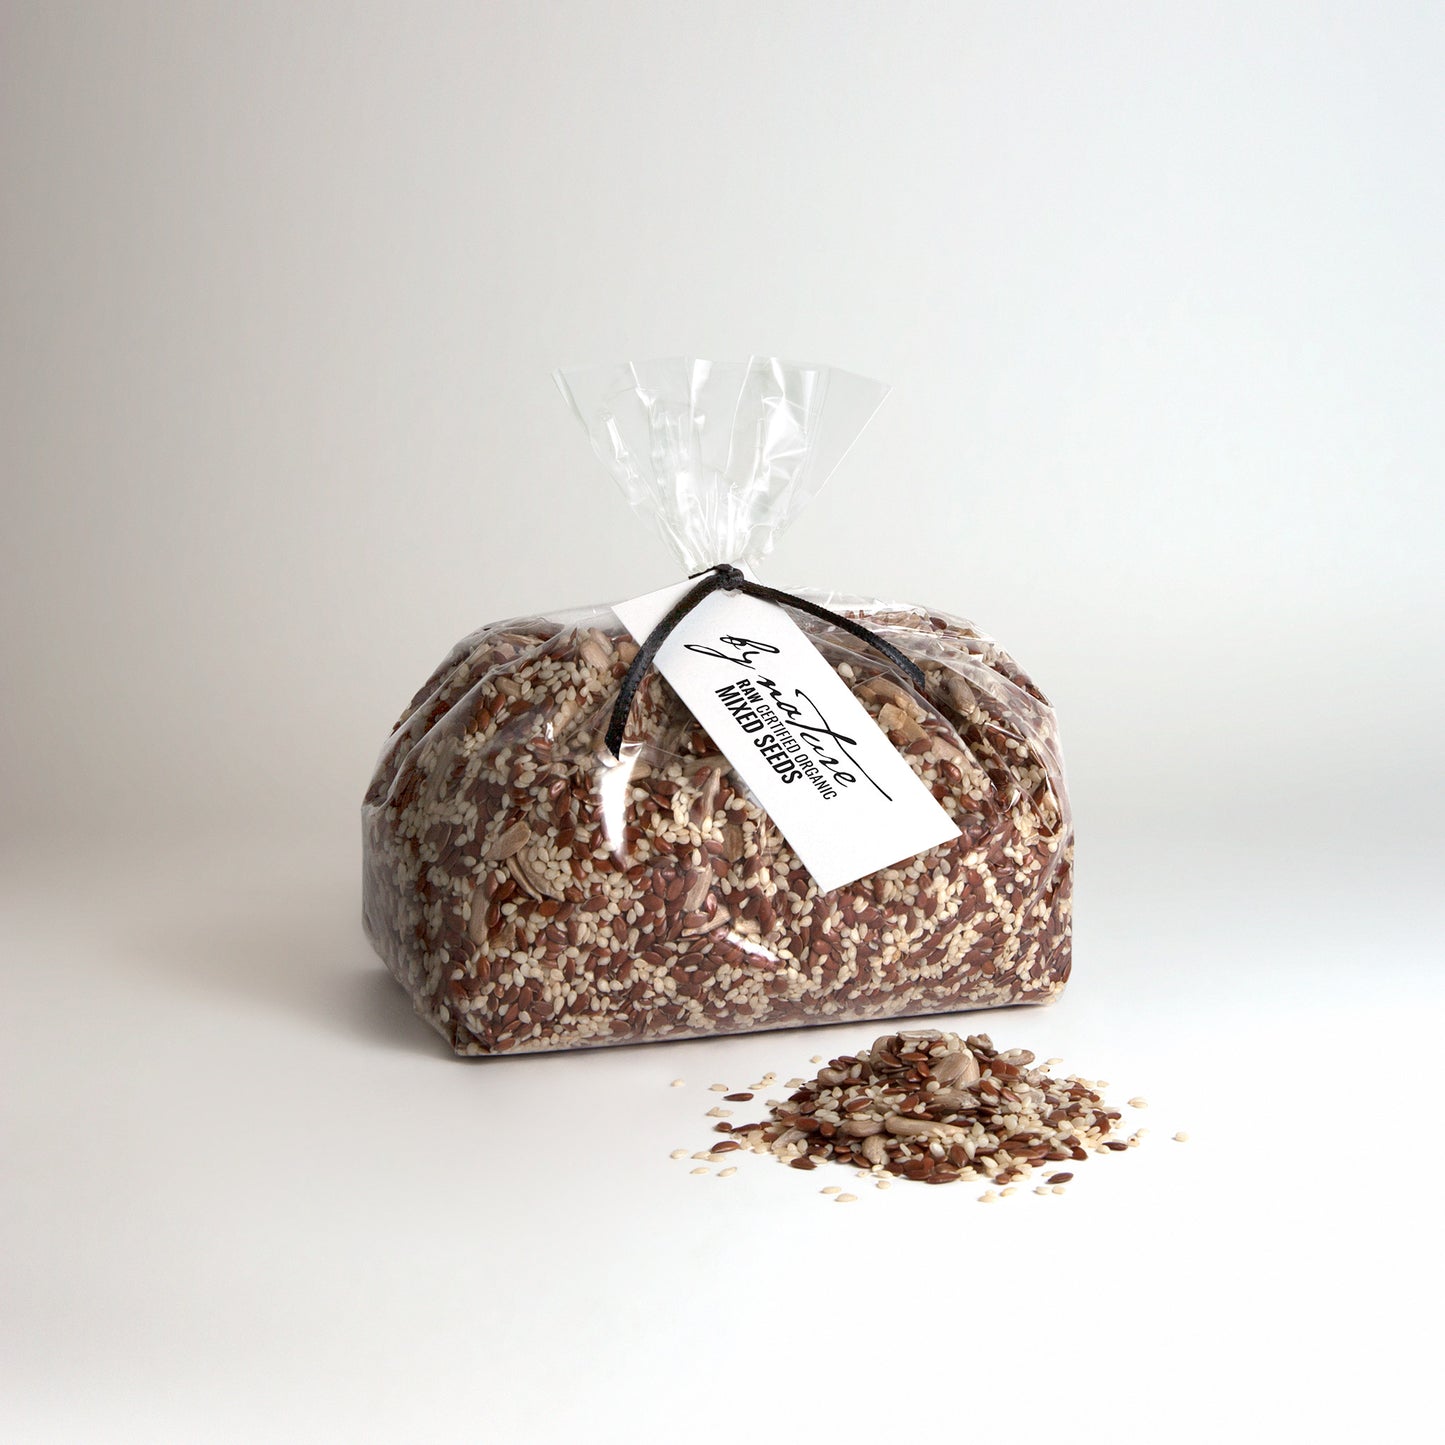 BY NATURE Mixed Seeds, 500g - flax, sesame, sunflower, raw, certified organic at source.